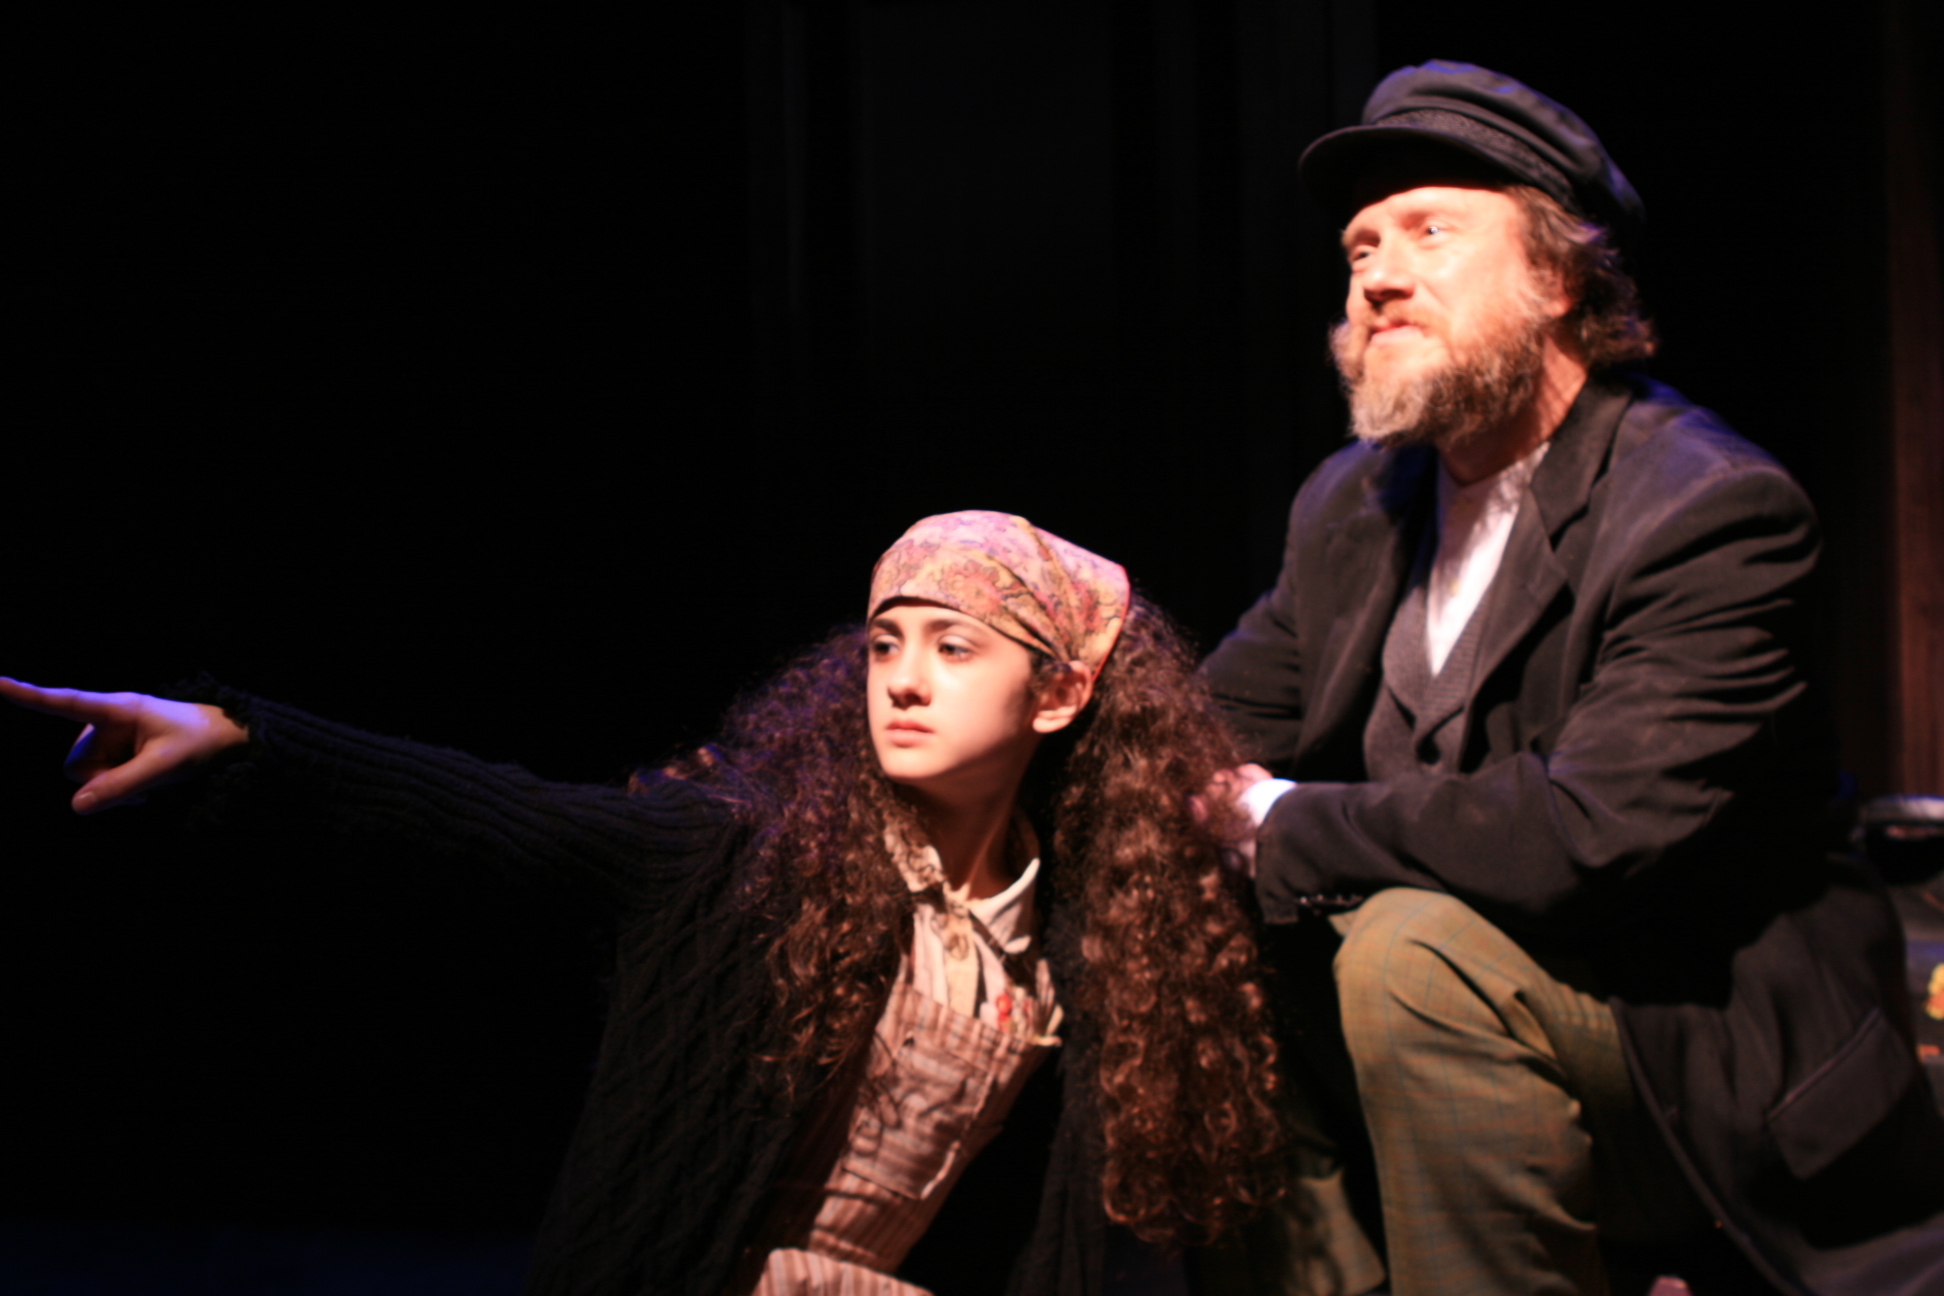 Leah Rose Orleans, as the Little Girl, points the way to America in Porchlight Music Theatre's RAGTIME.